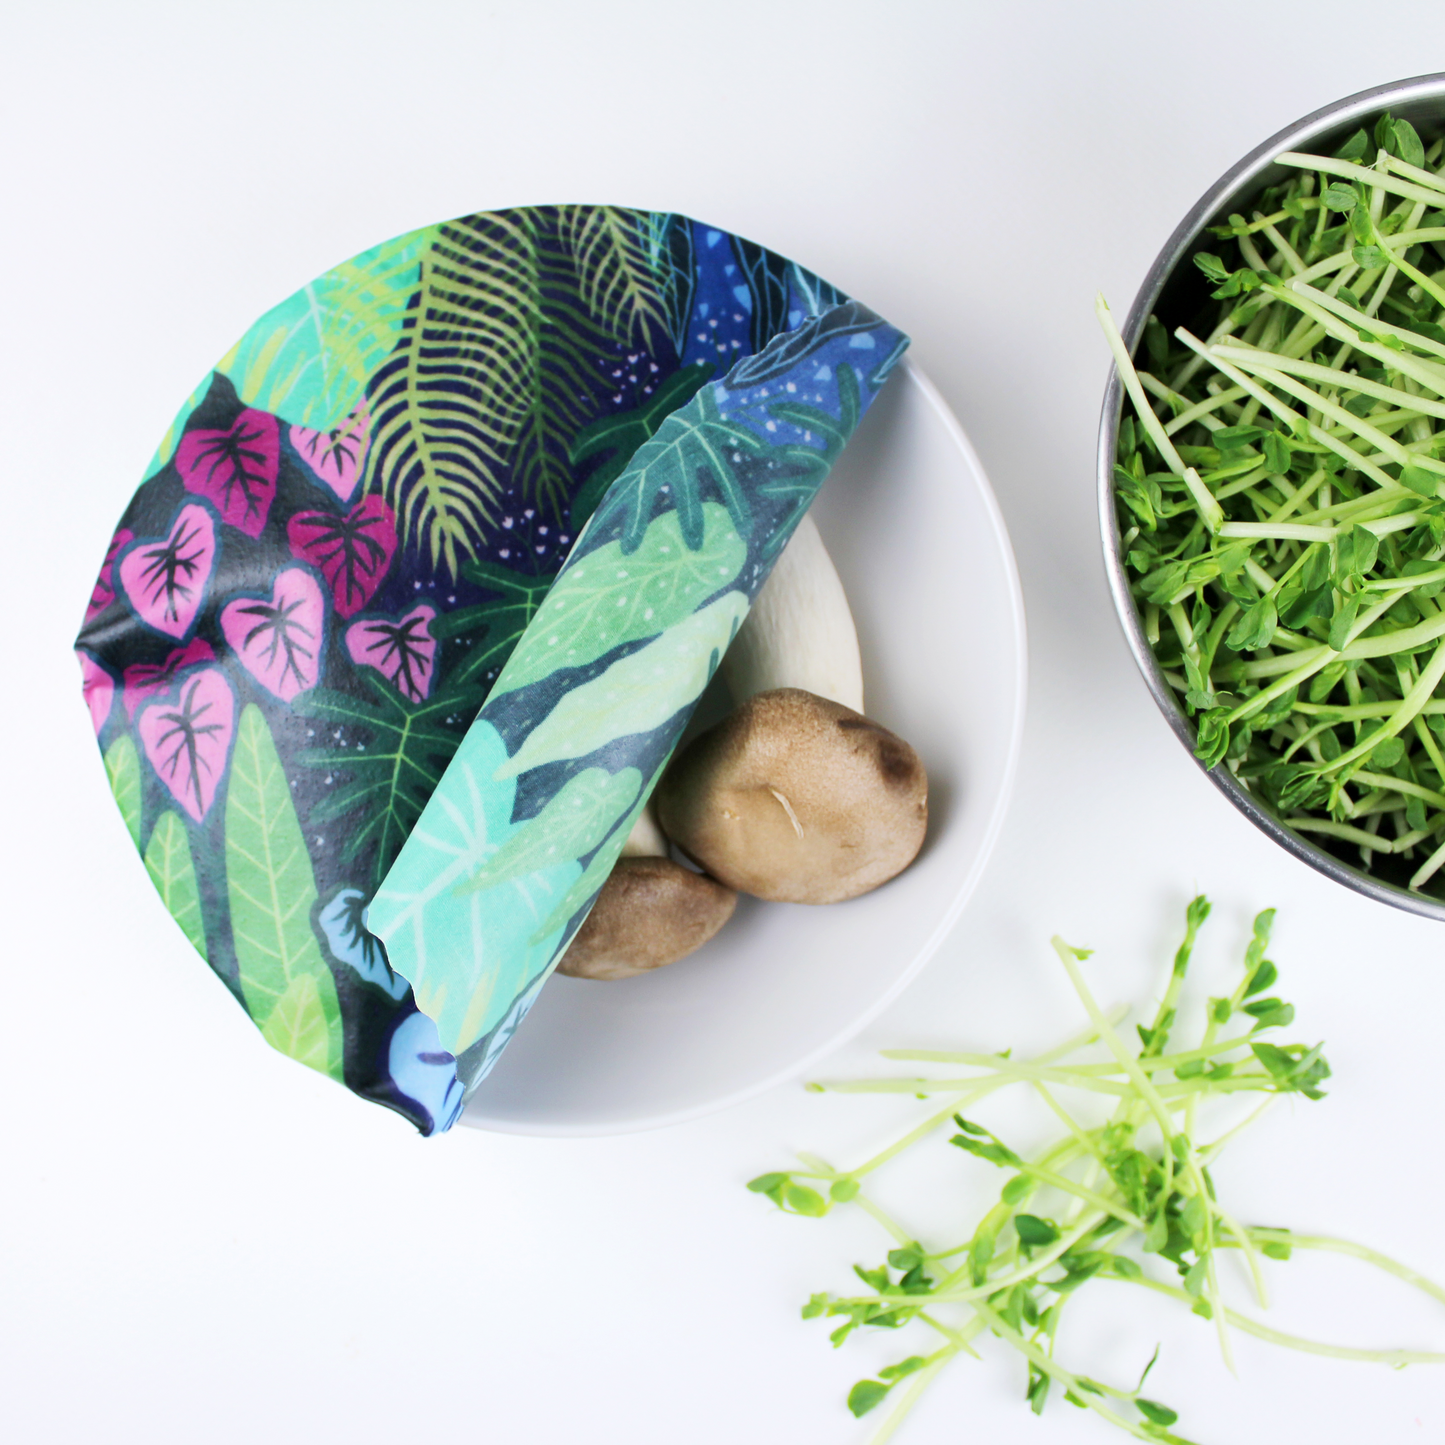 An earth-friendly alternative to plastic wrap and a must have in the kitchen! We've teamed up with Minimakers to create these beautiful wraps made from 100% premium cotton featuring our Cloud Forest print, beeswax, tree resin and jojaba oil. 